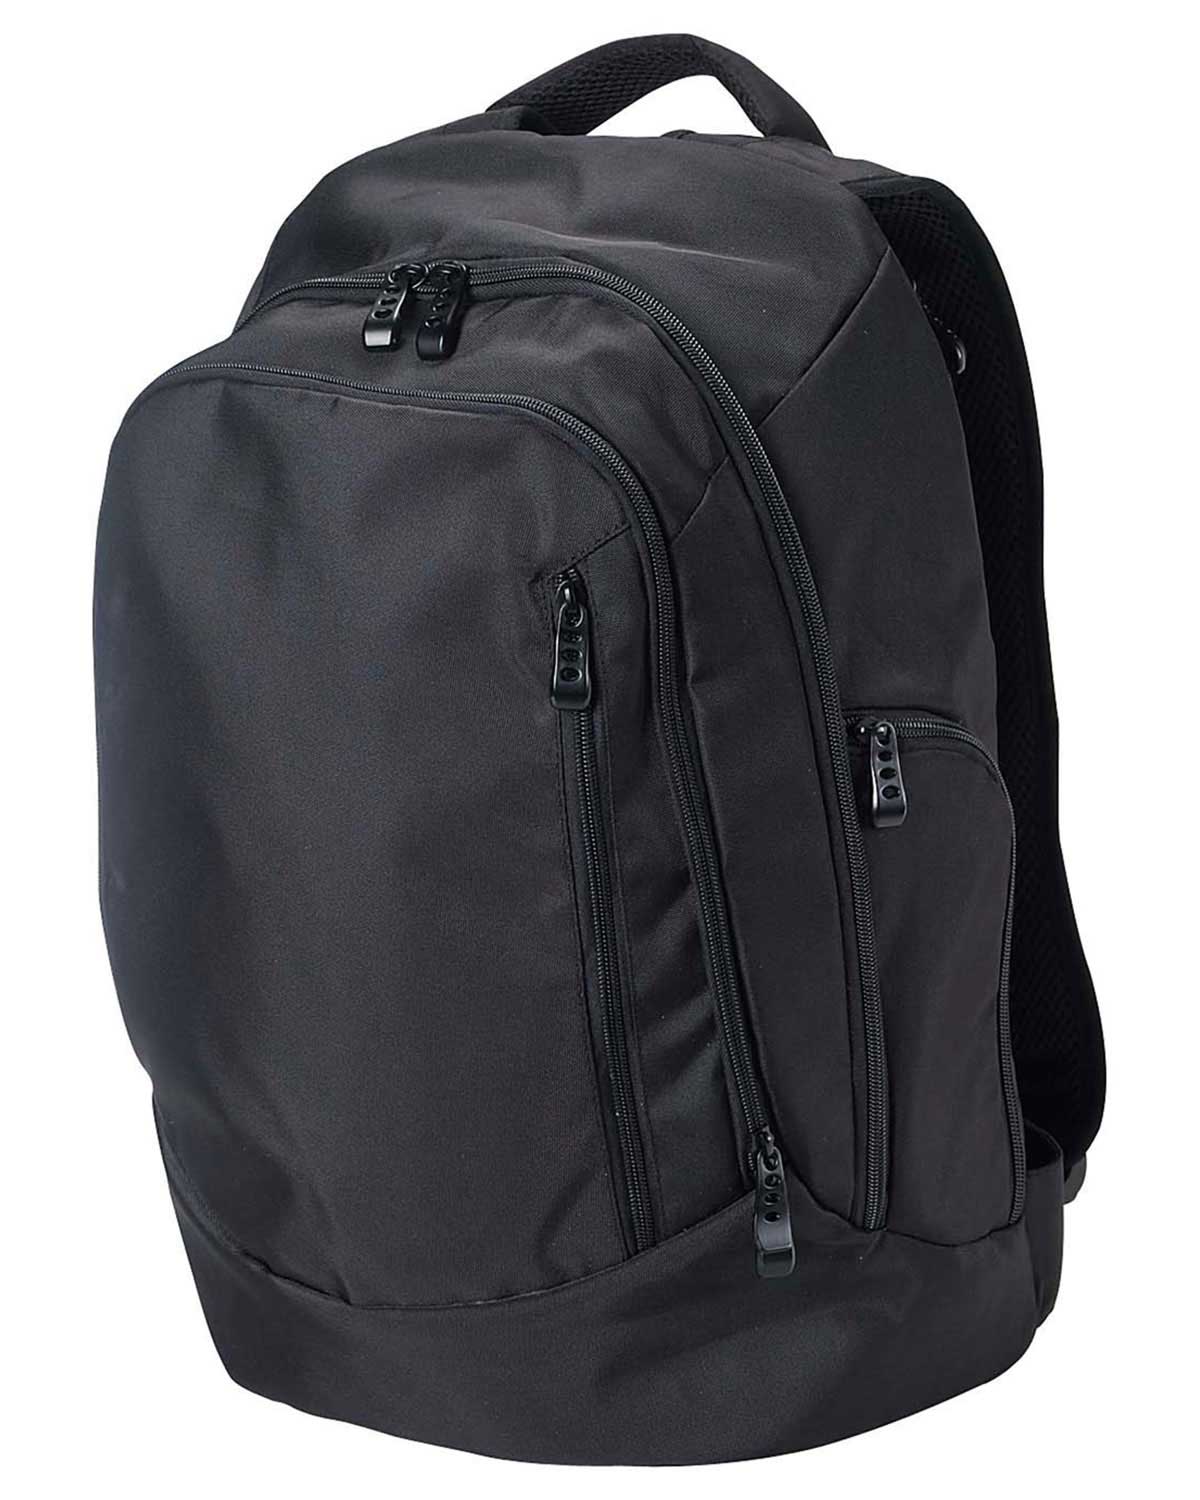 Big Accessories / BAGedge BE044 Unisex Tech Backpack at Apparelstation